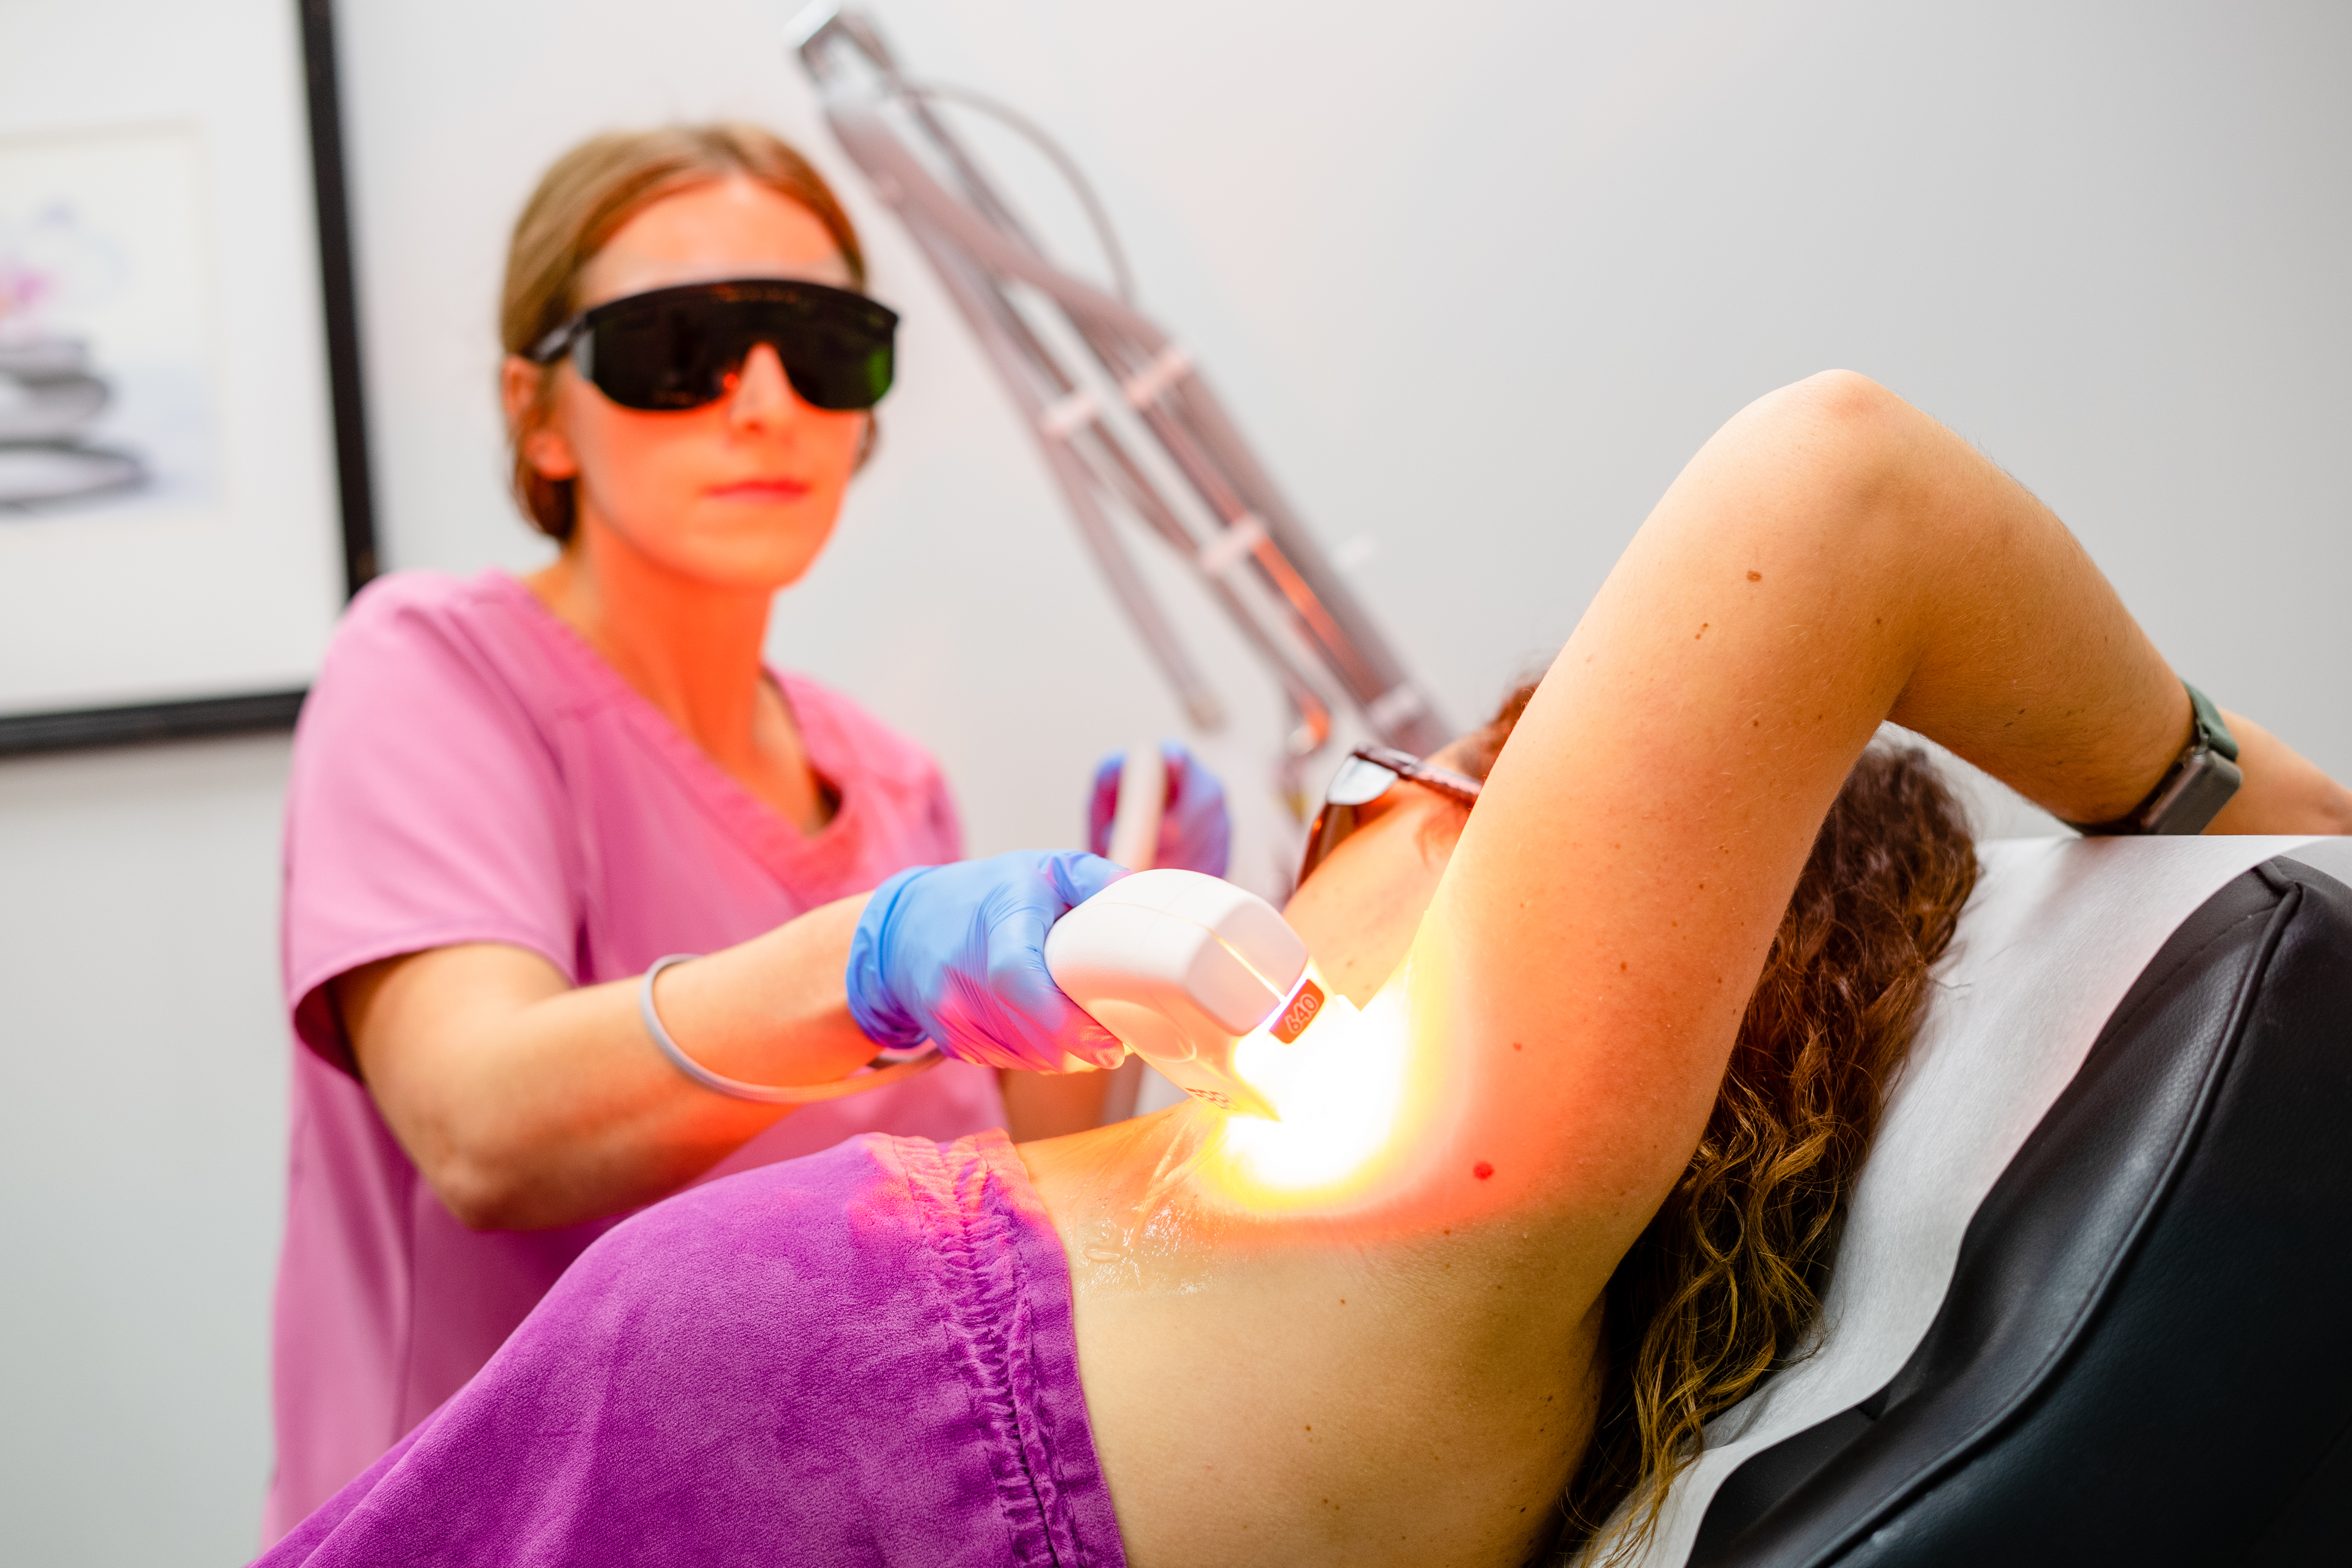 Aesthetician is performing laser hair removal on a patient.